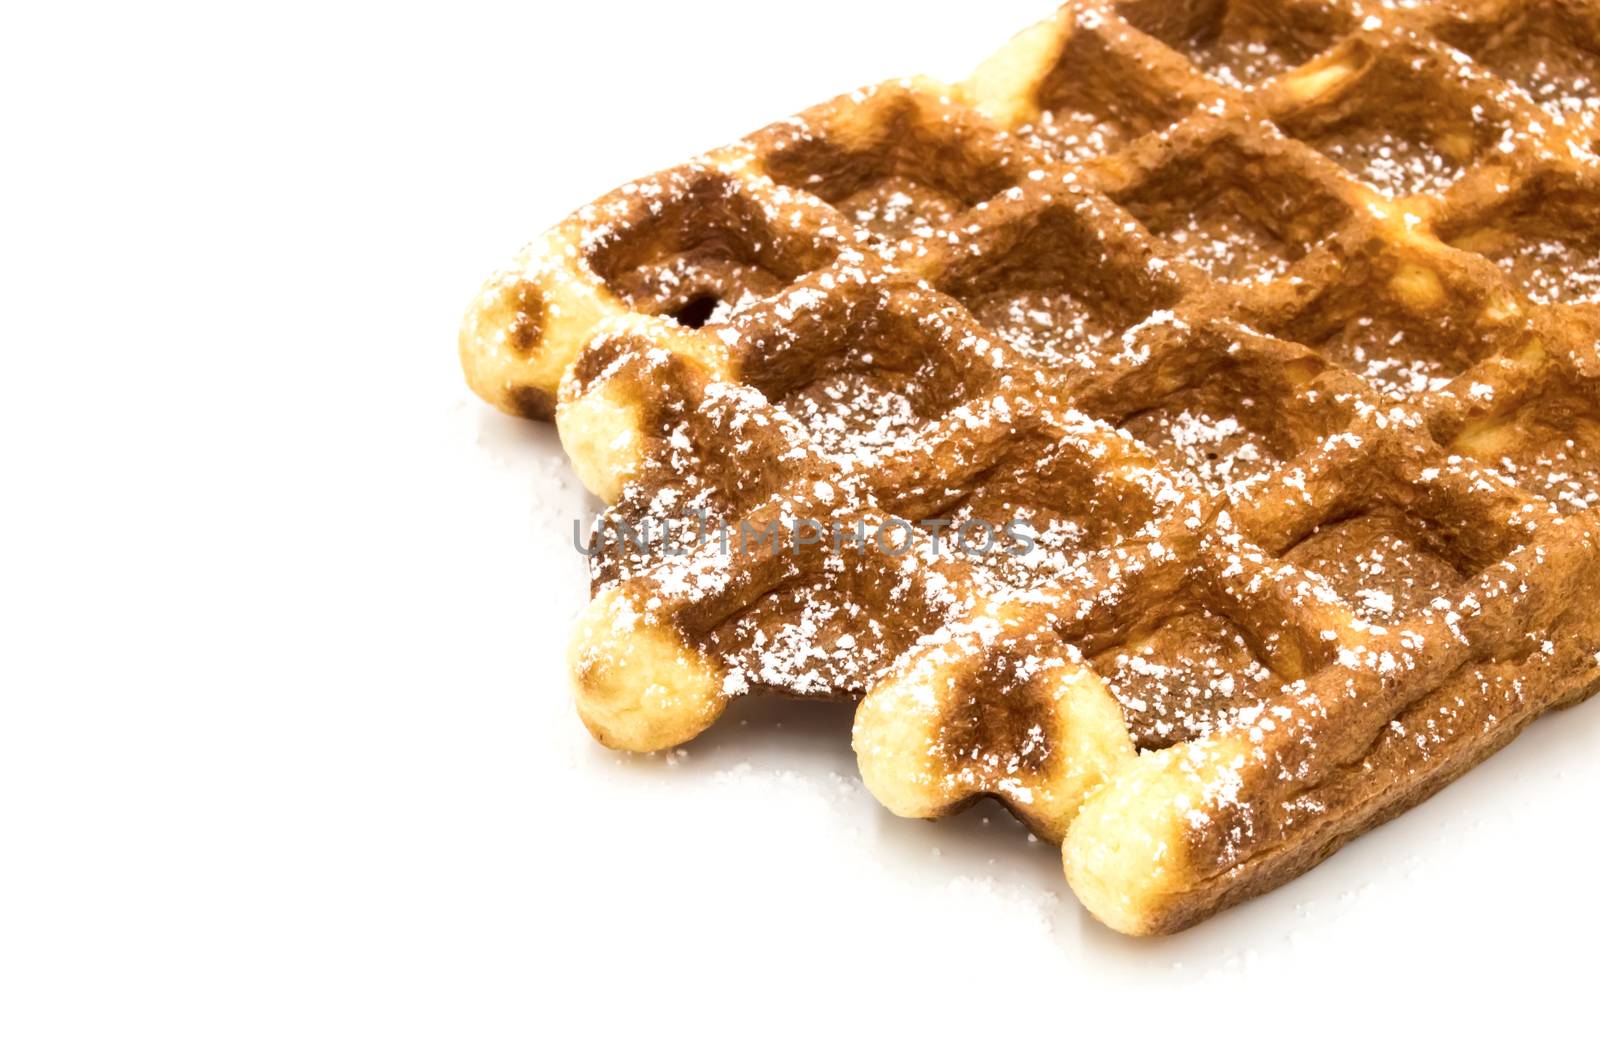 Freshly baked Belgian waffles, close-up. Dessert by Philou1000